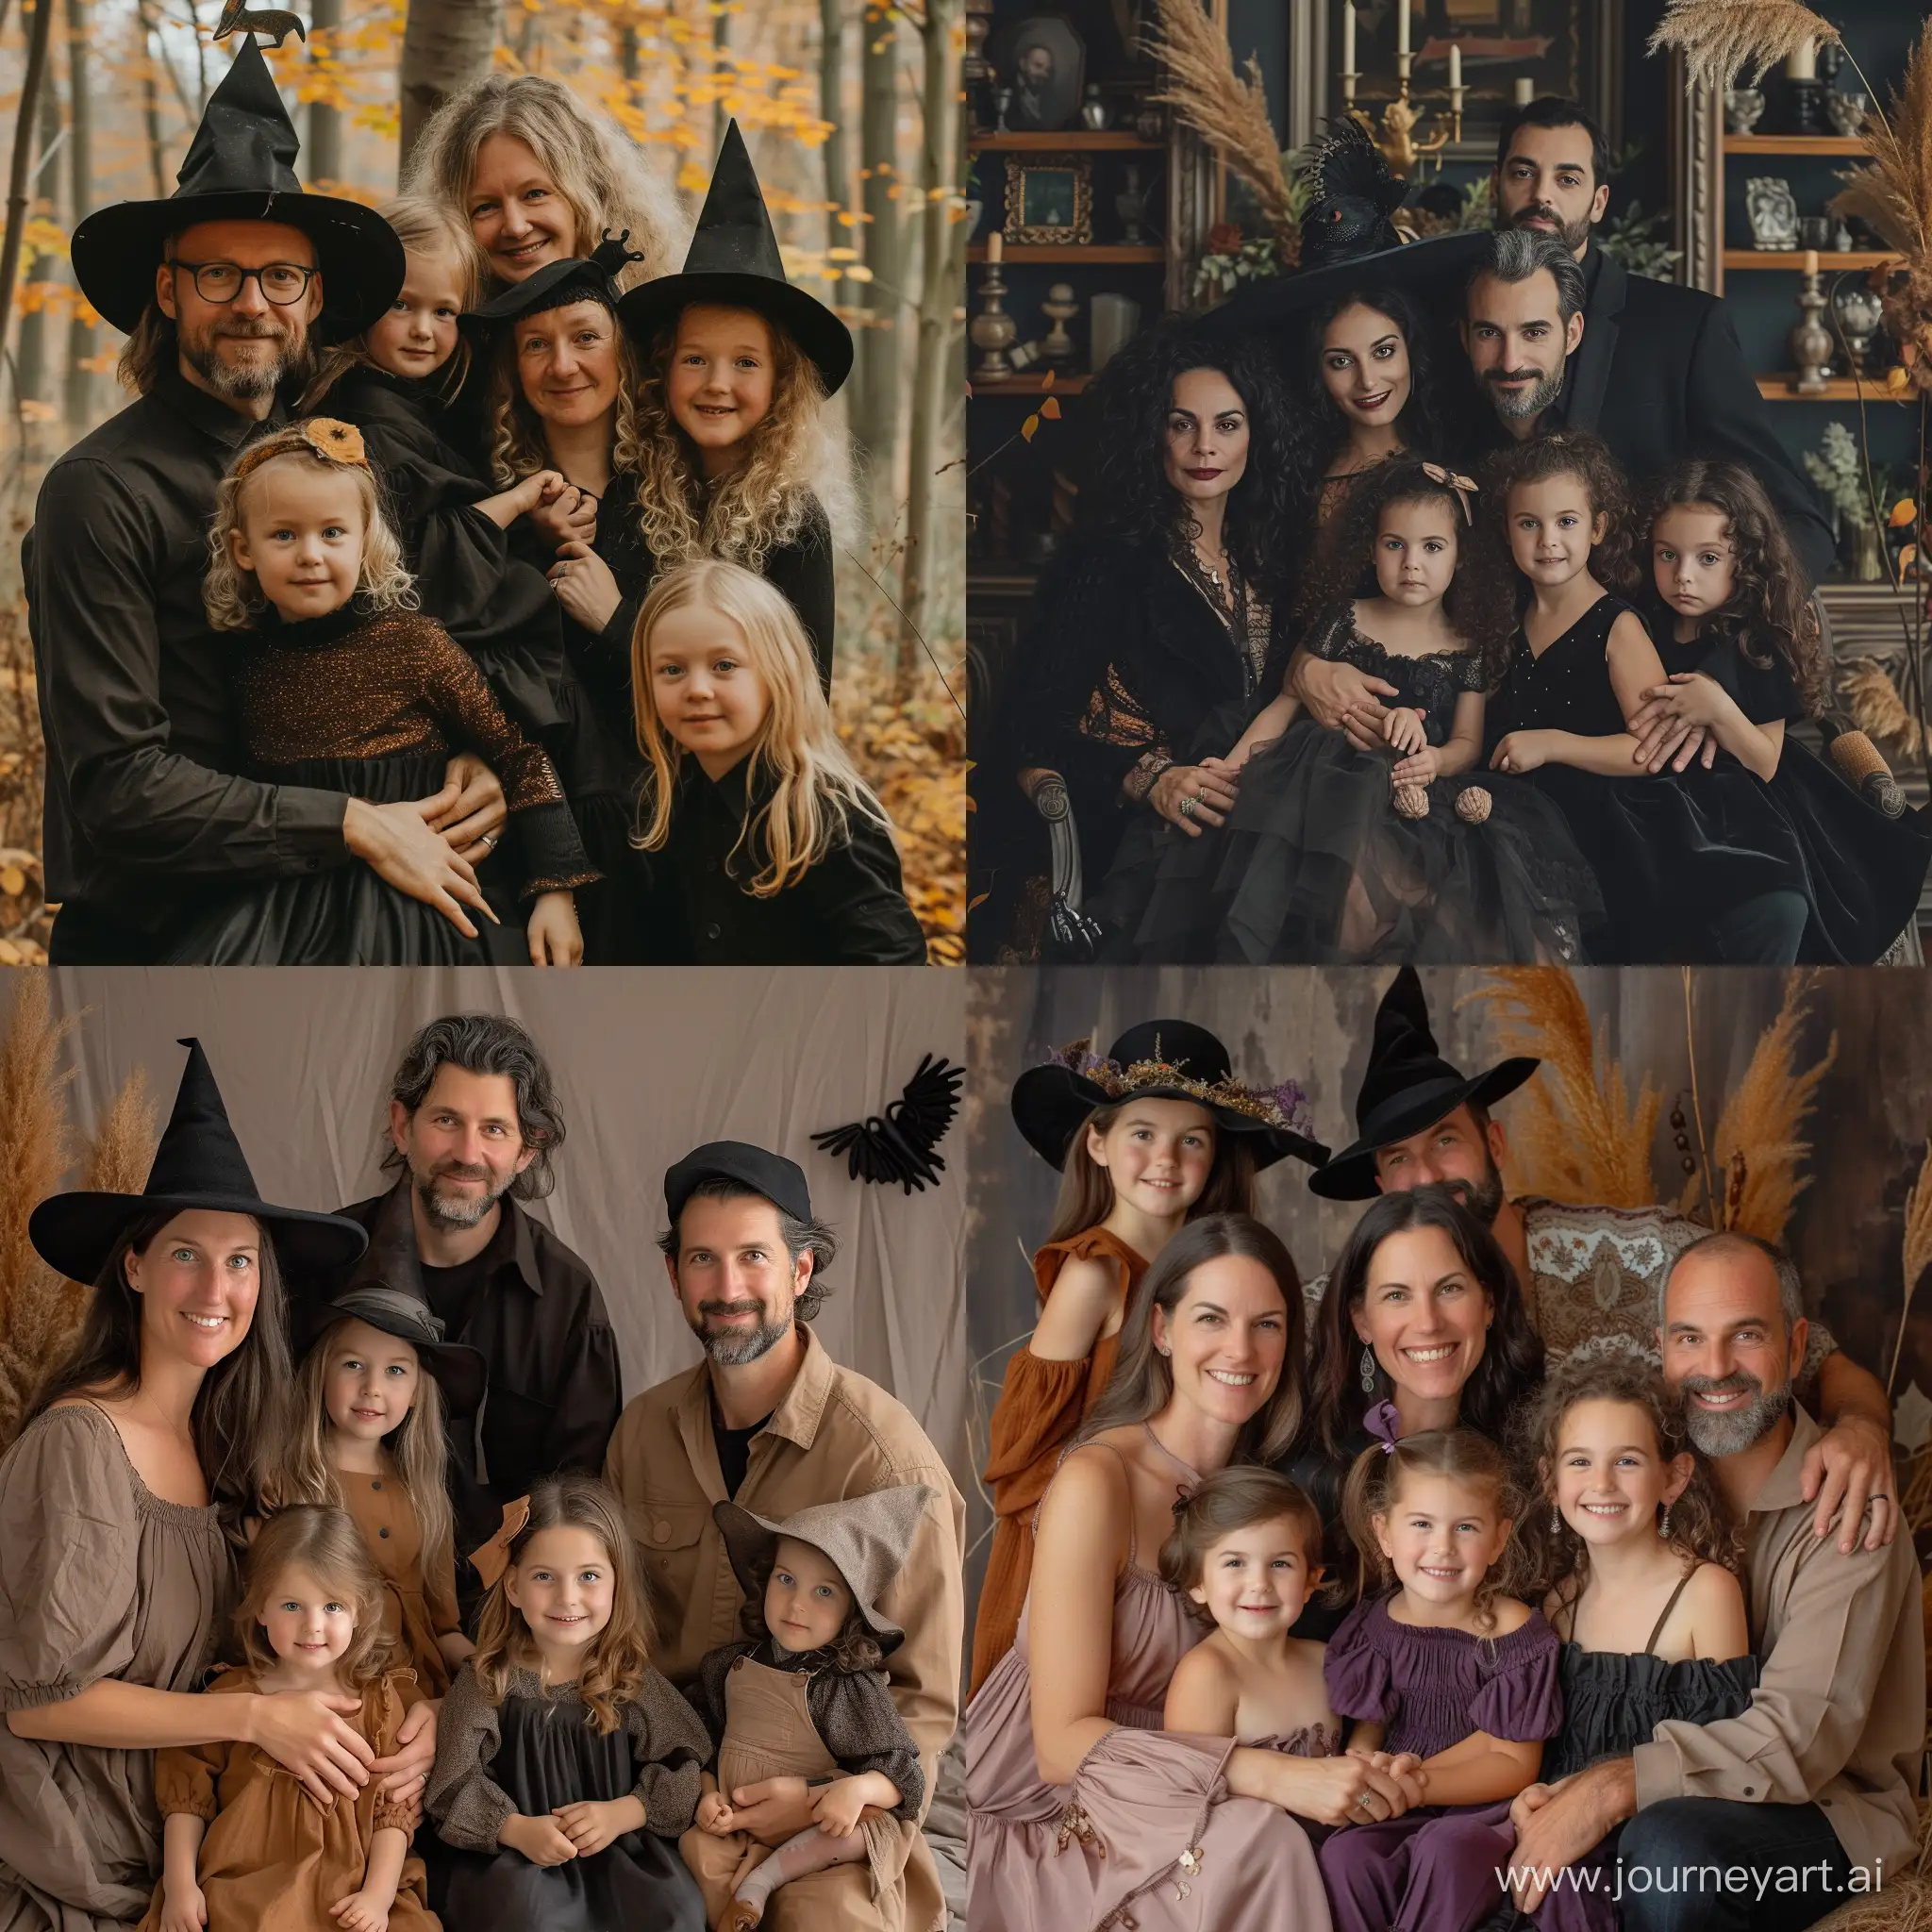 a family photo witch includes man, woman, 2 little girls and one little boy